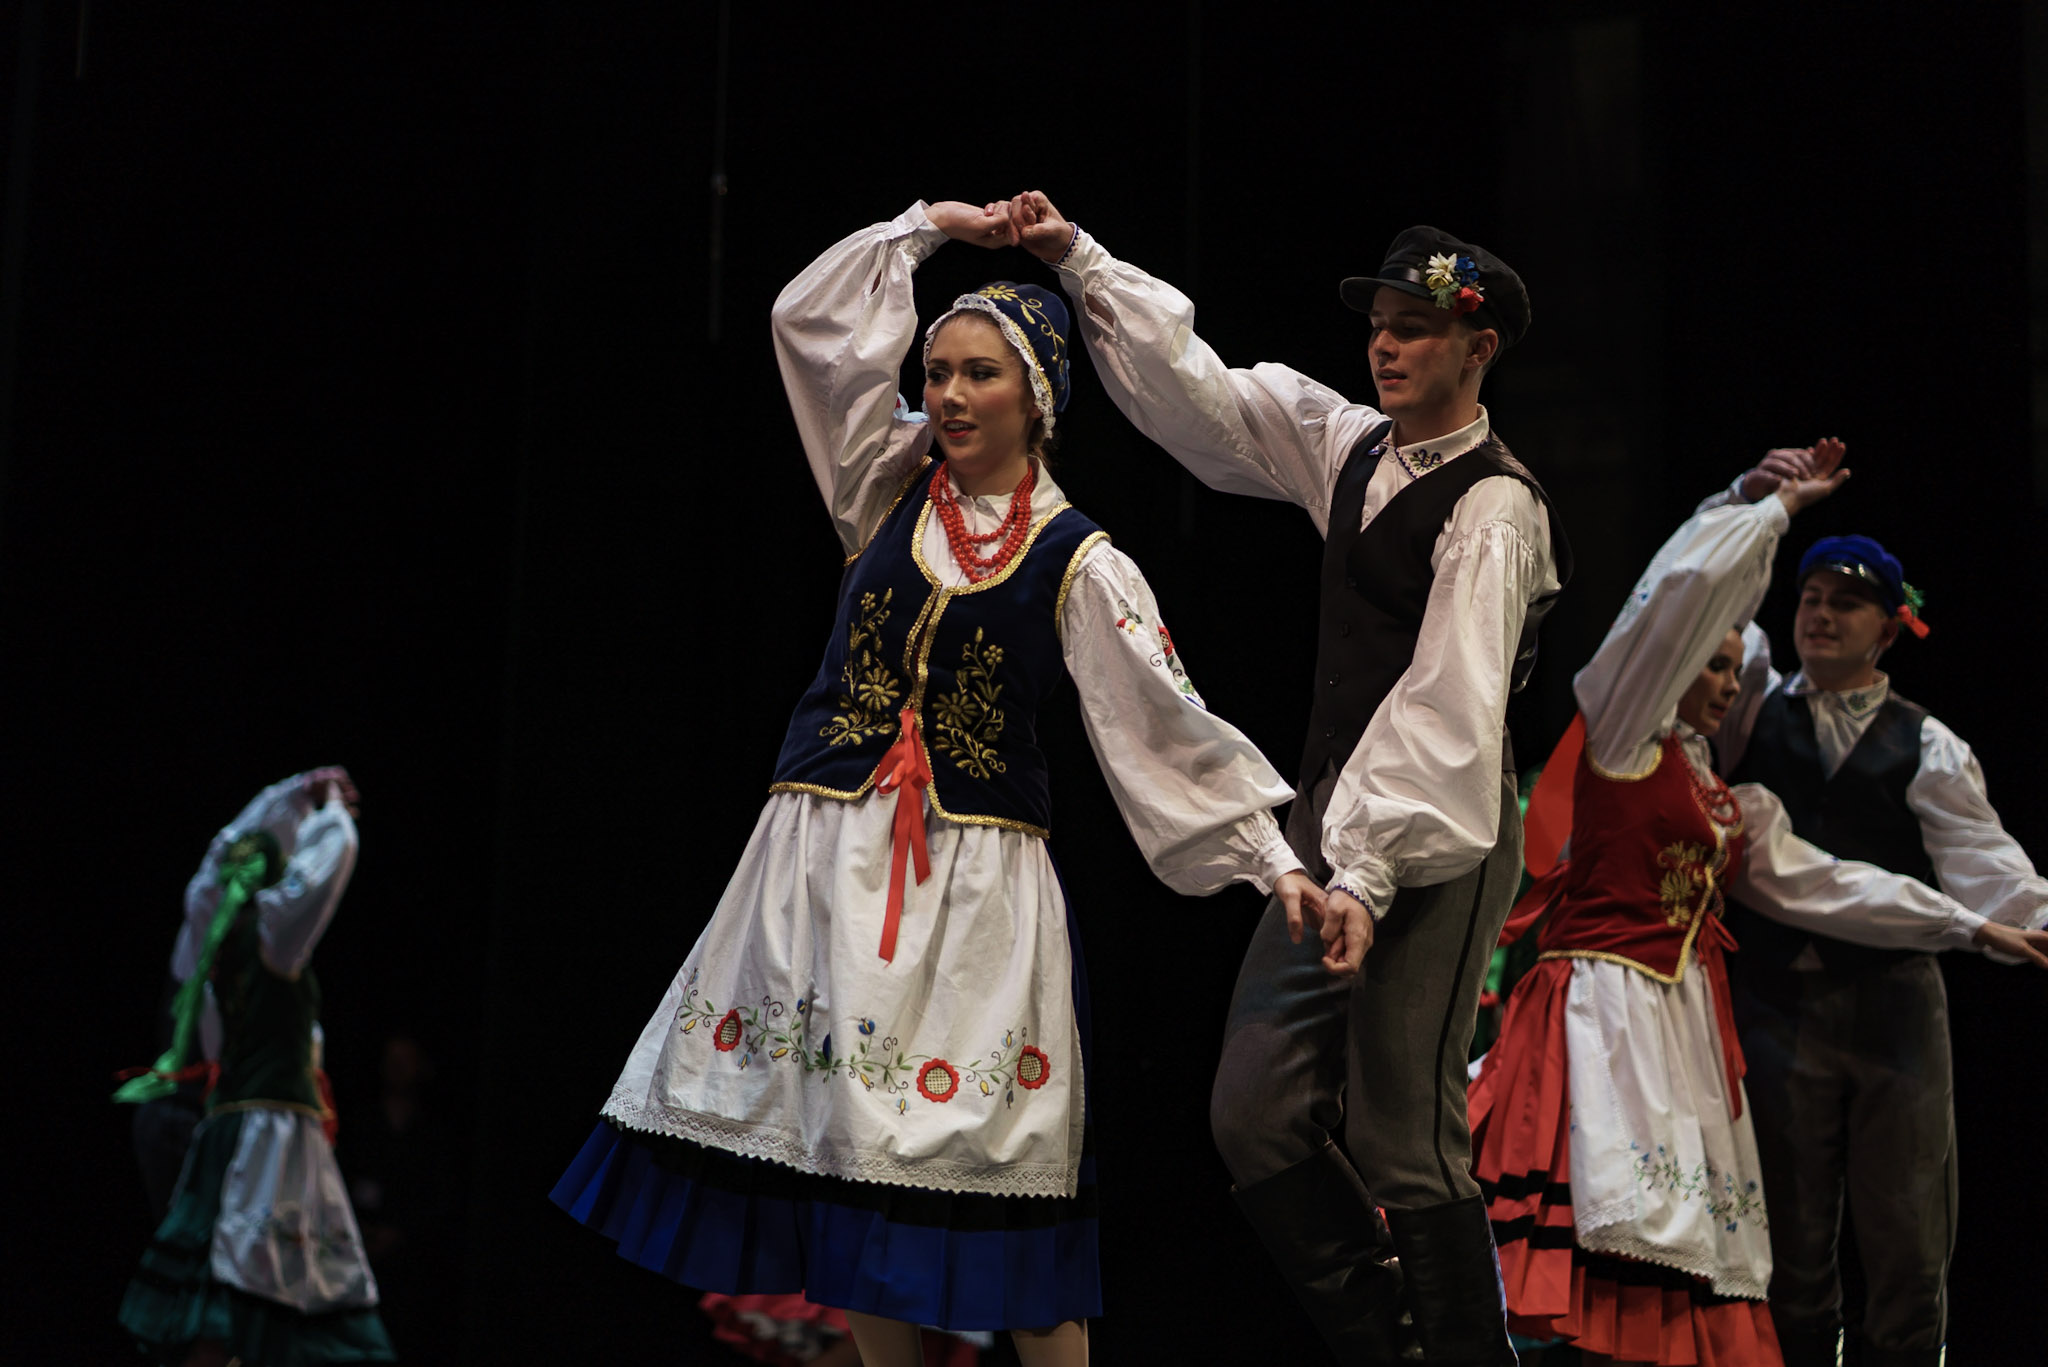 The Kaszuby dances are from the Baltic area of Poland and are mostly gentle, joyful, and graceful. Although they have many characteristic traits of the dances from the neighbouring regions, they also reveal obvious Swedish and German influences both in music and in the steps. They can be divided into dances of the rural population and of people of the sea.